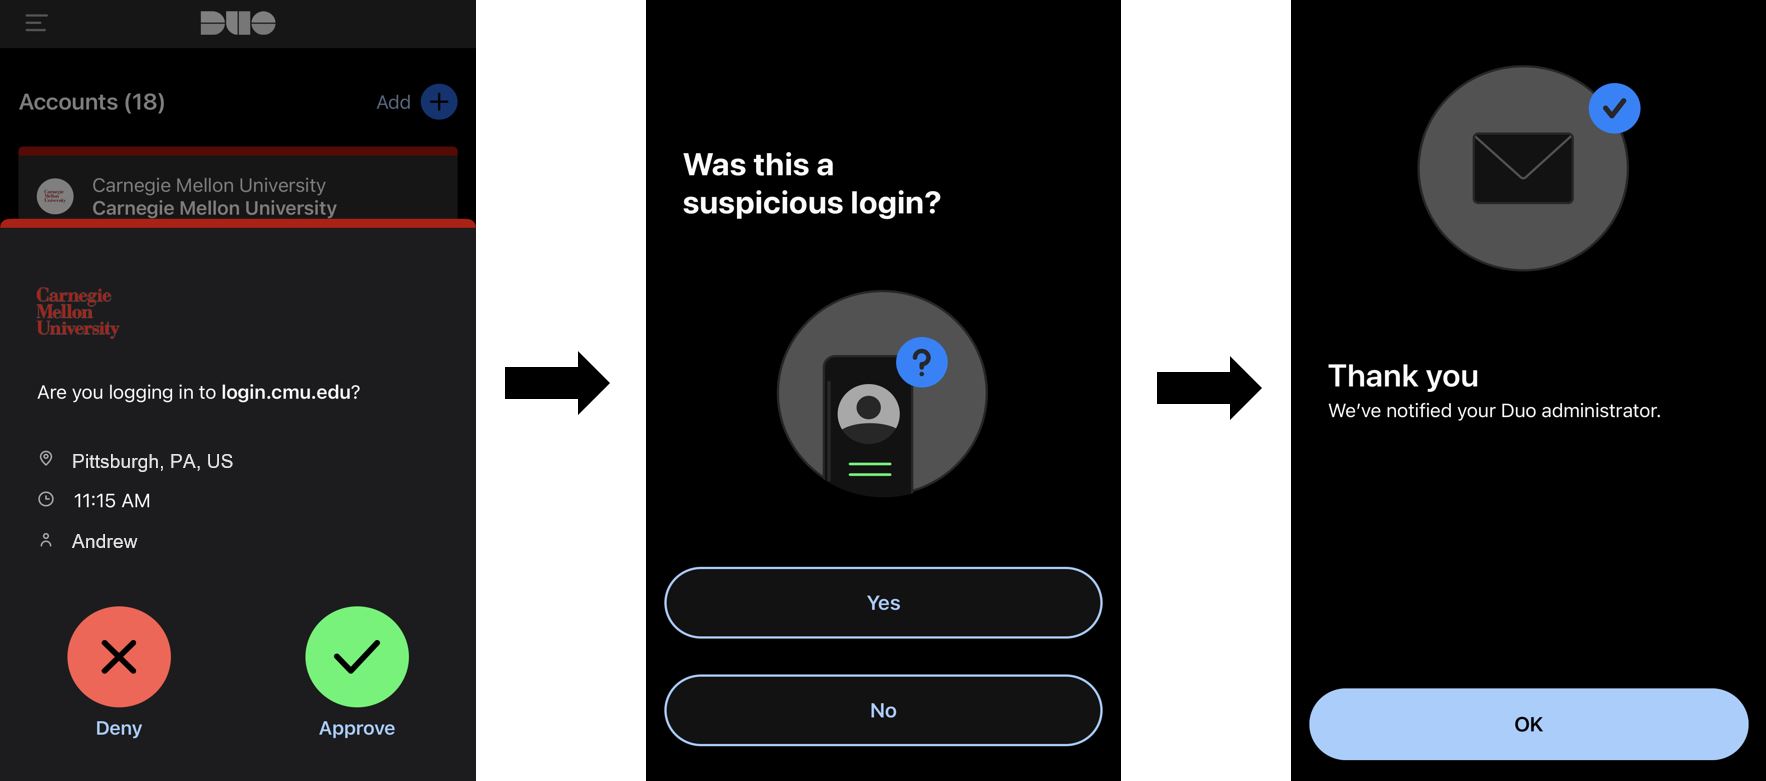 3 images. First image is of DUO screen with option to "deny" or "approve" authentication request. 2nd image is from the duo app that reads "Was this a suspicious login?" with options to click "Yes" or "No". 3rd image is the Duo mobile app reading "thank you. We've notified your DUO administrator. "